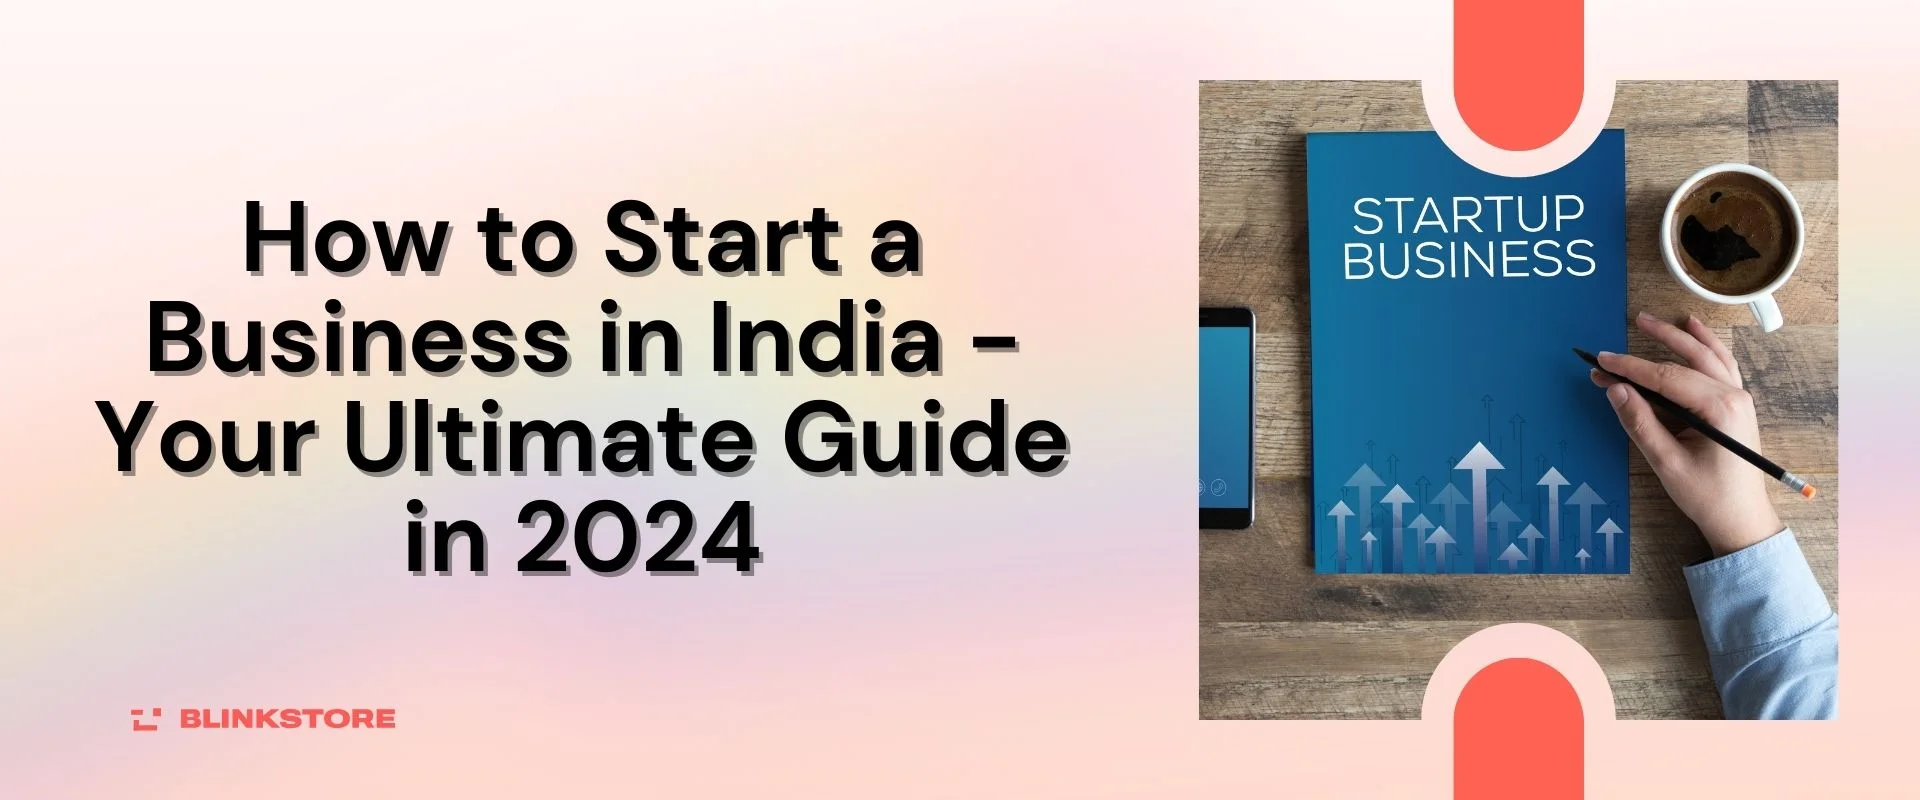 How to Start a Business in India – Your Ultimate Guide in 2024